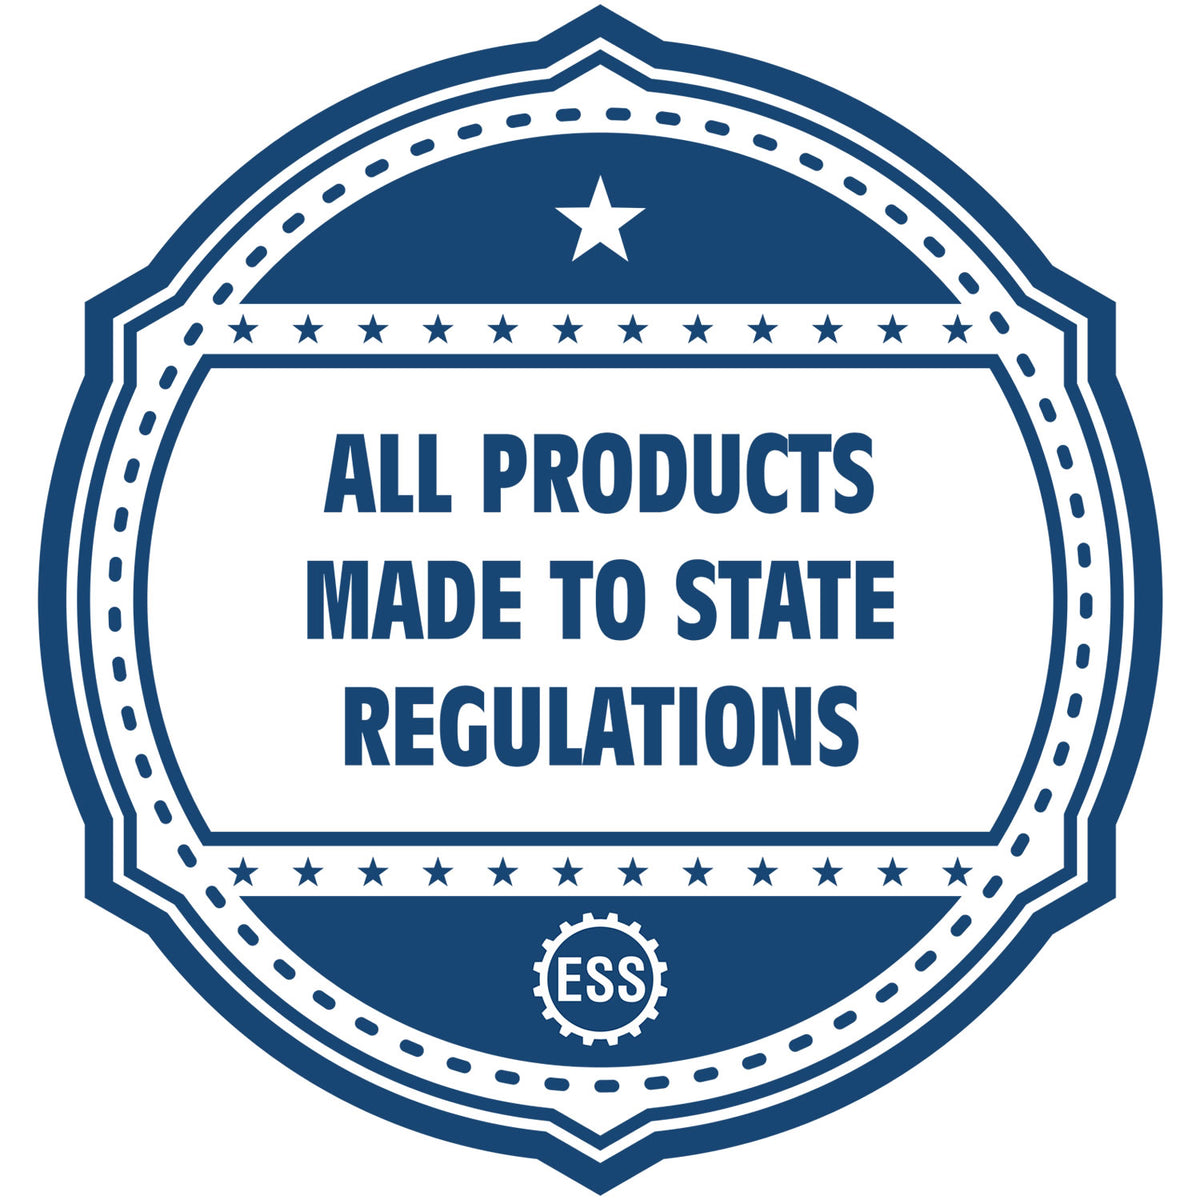 A blue icon or badge for the Hybrid Ohio Landscape Architect Seal showing that this product is made in compliance with state regulations.